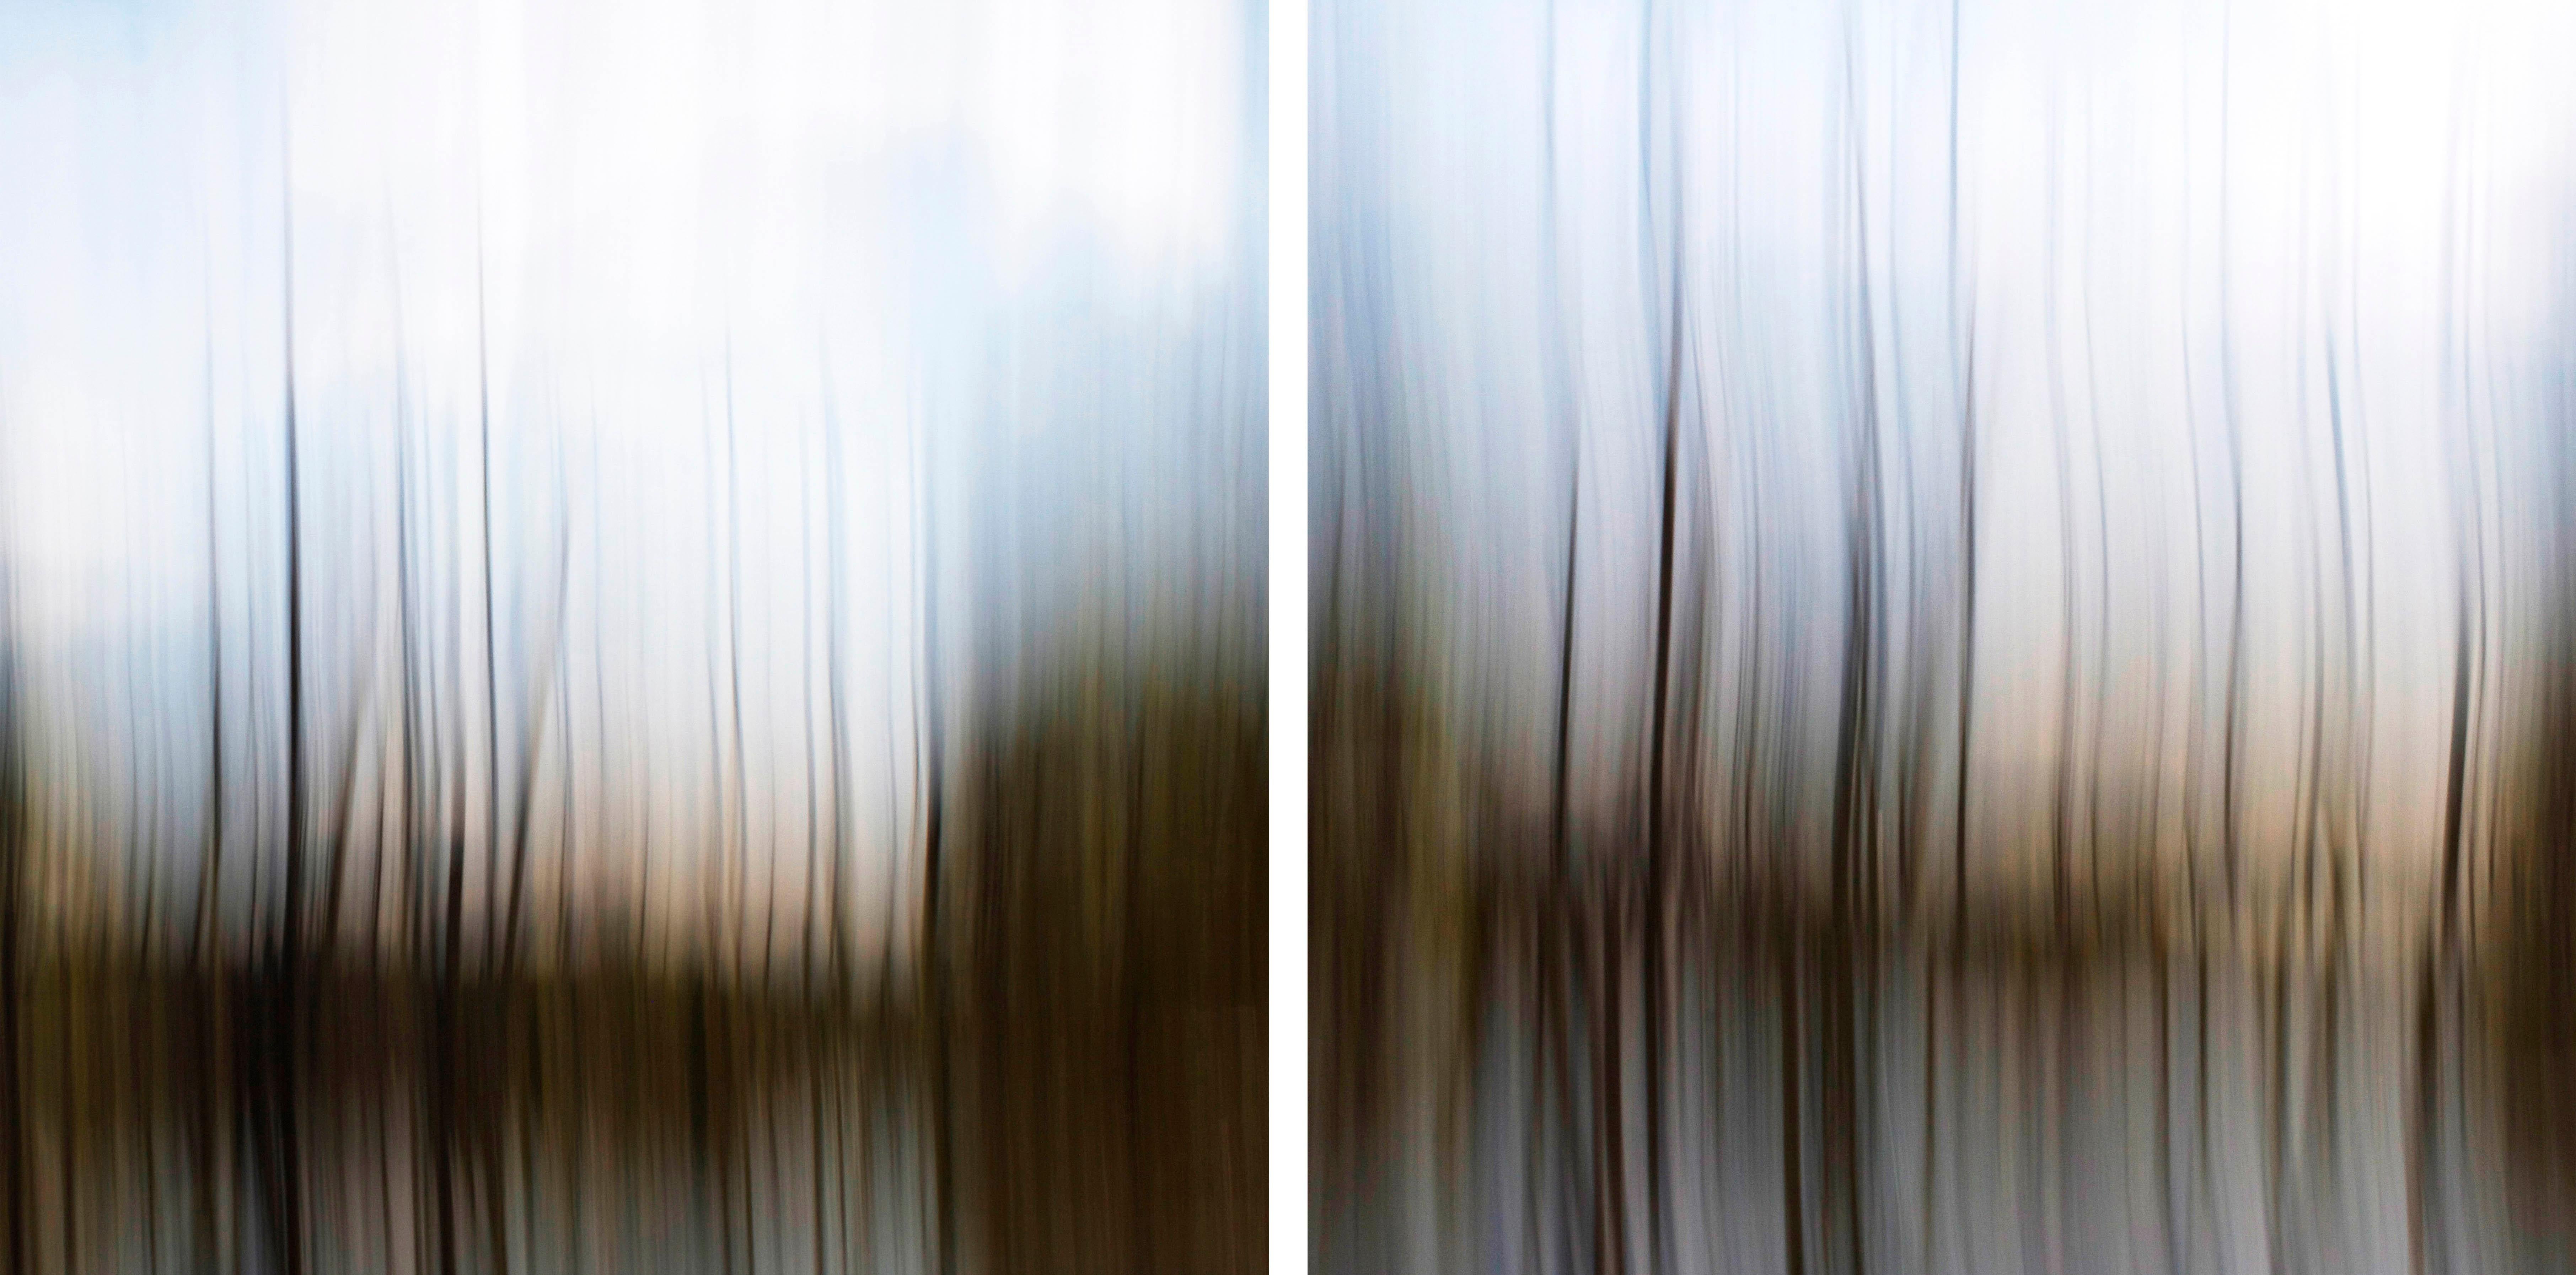 Etienne Labbe Abstract Photograph - Through The Wetlands - contemporary, abstracted landscape, photography on dibond